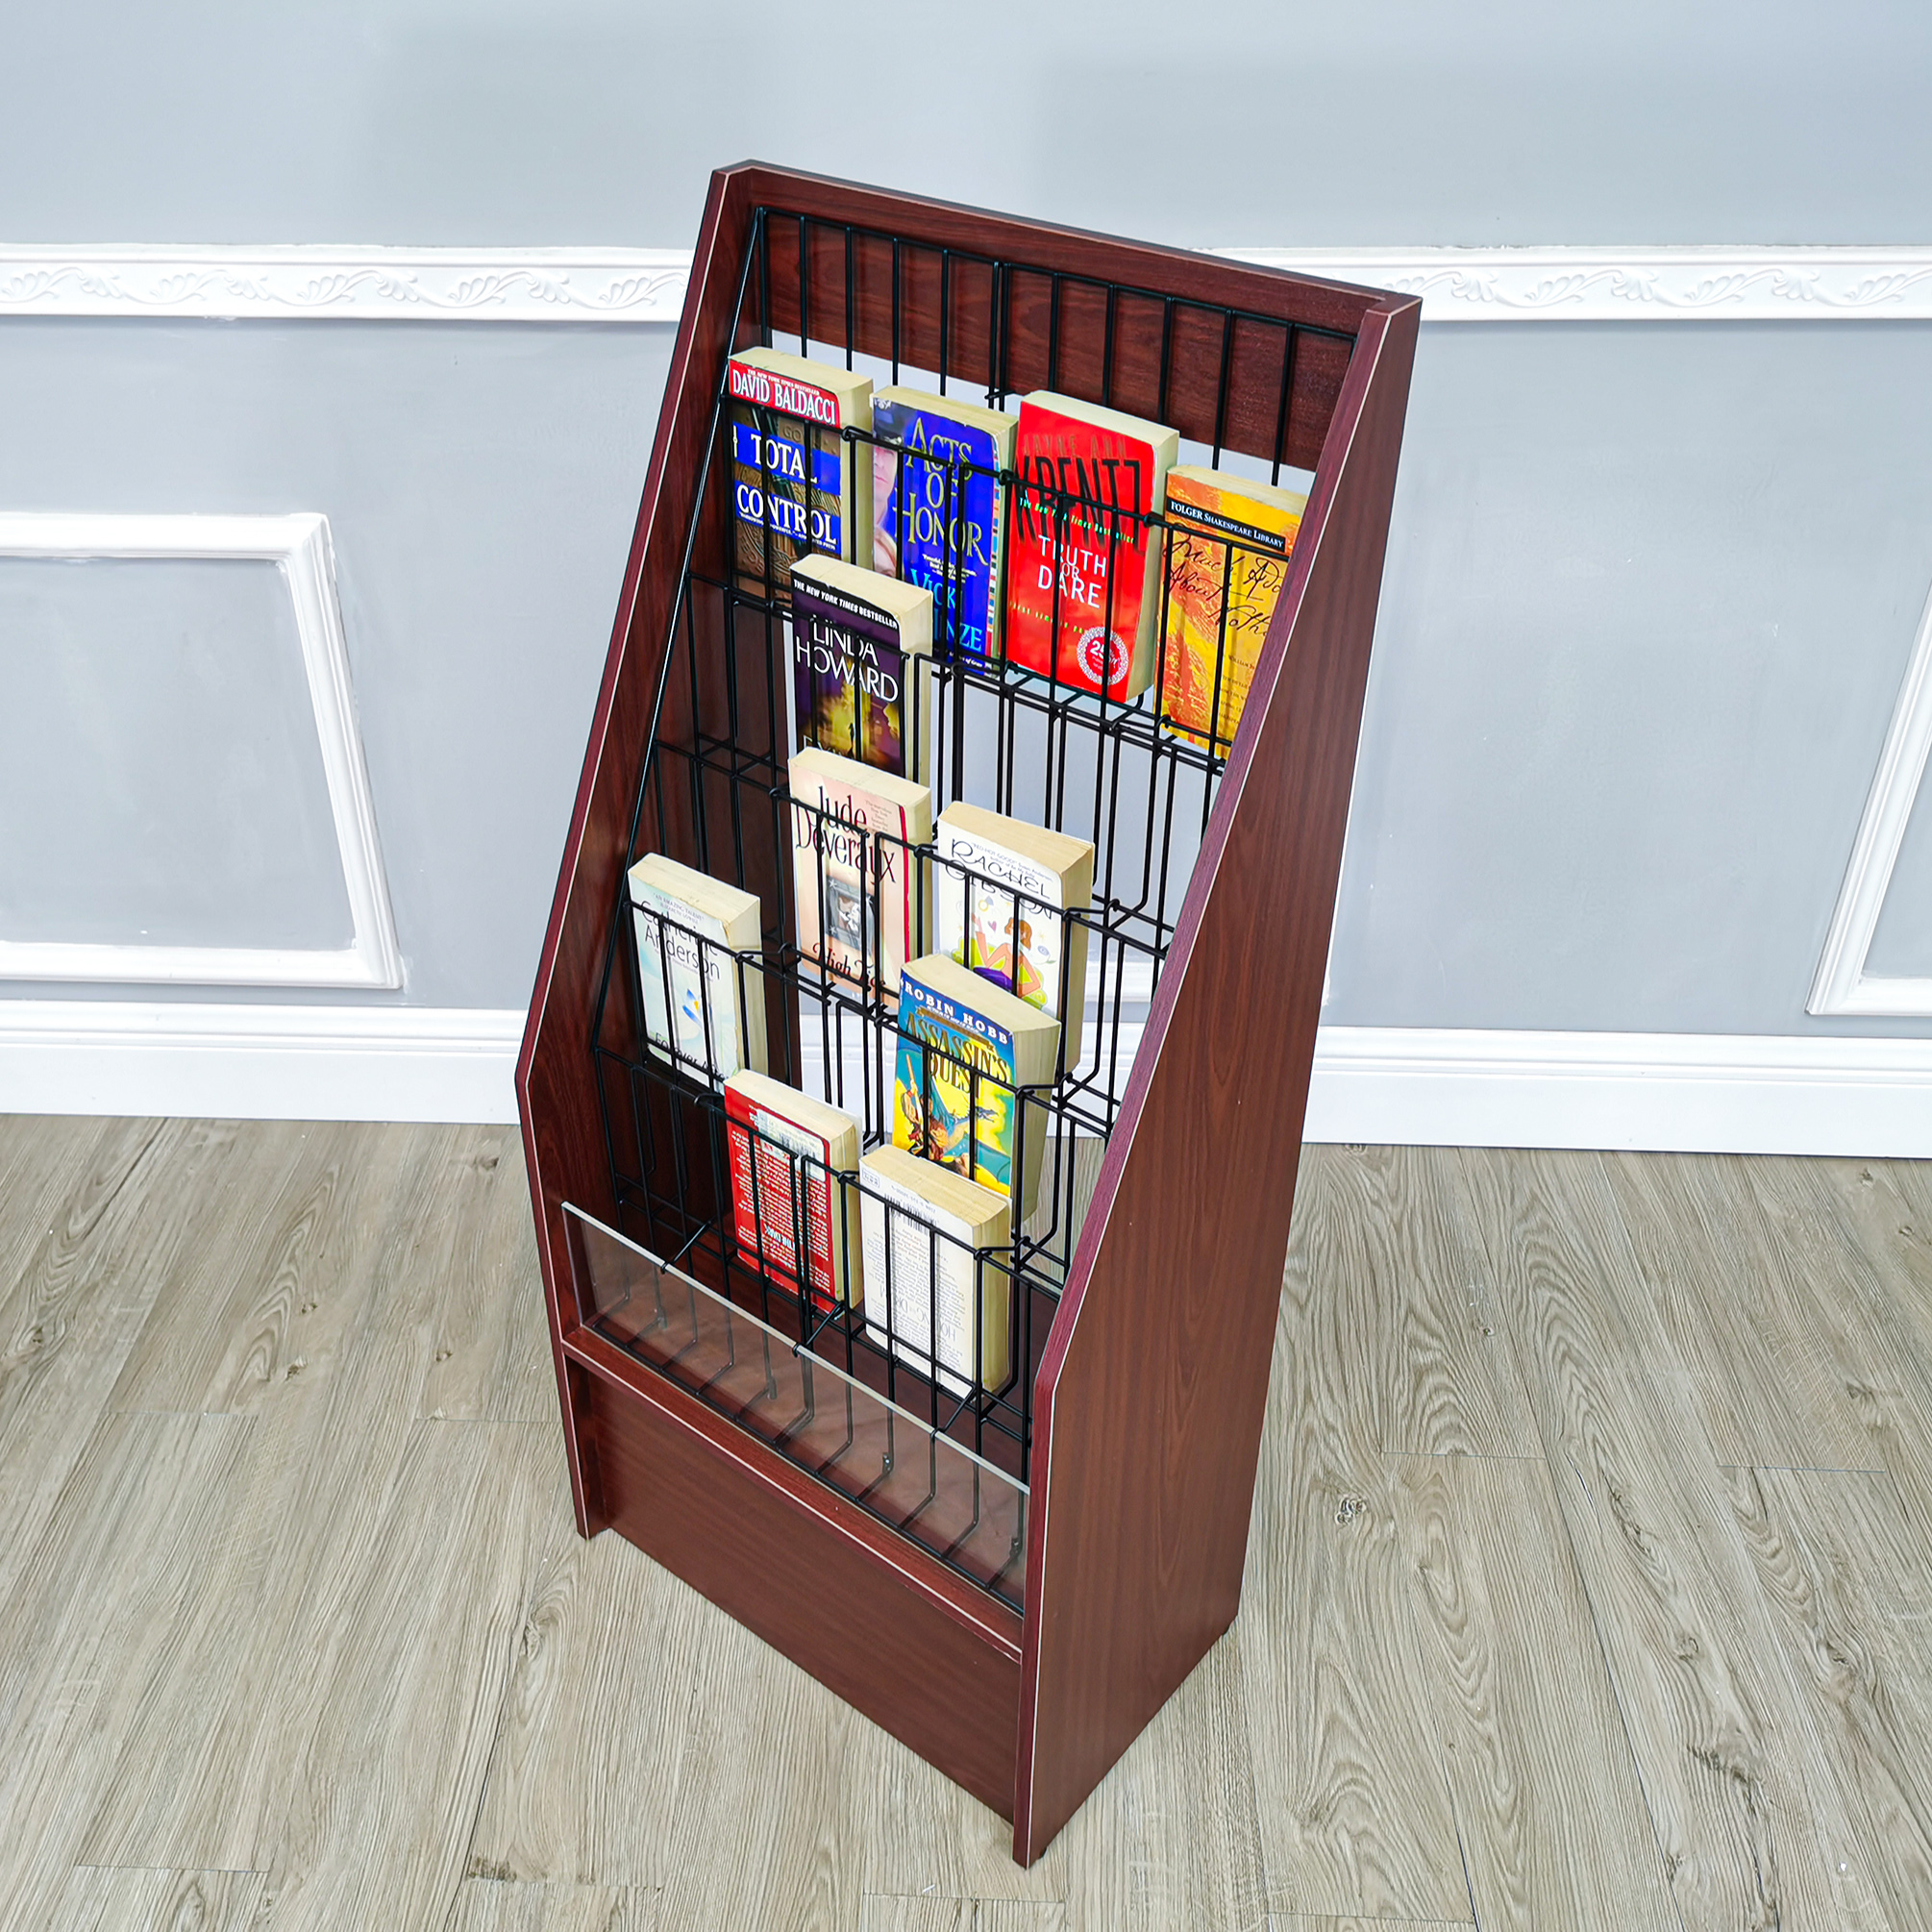 FixtureDisplays Literature Rack Brochure Leaflet Stand 19 inches wide x 12 inches deep x 44 inches tall 1746 Red